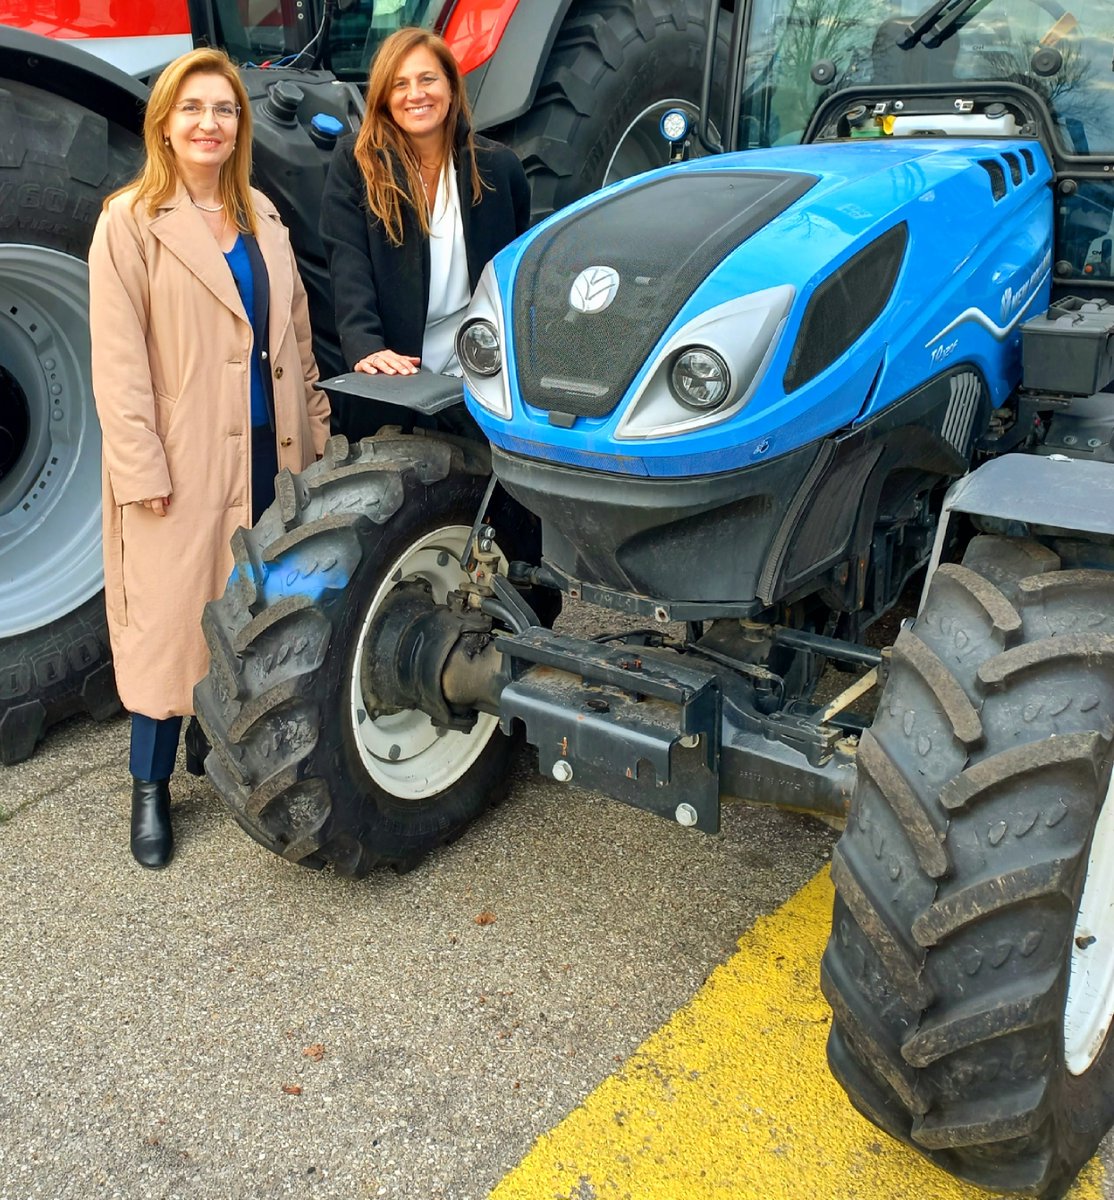 Yesterday, February 11 was UN International Women and Girls in Science day. Let's celebrate Claudia Campanella and Angela Falagario, two engineers working at @NewHollandAG ! They are setting a much needed example to look up to for girls and young women in ag 👊 #girlpower